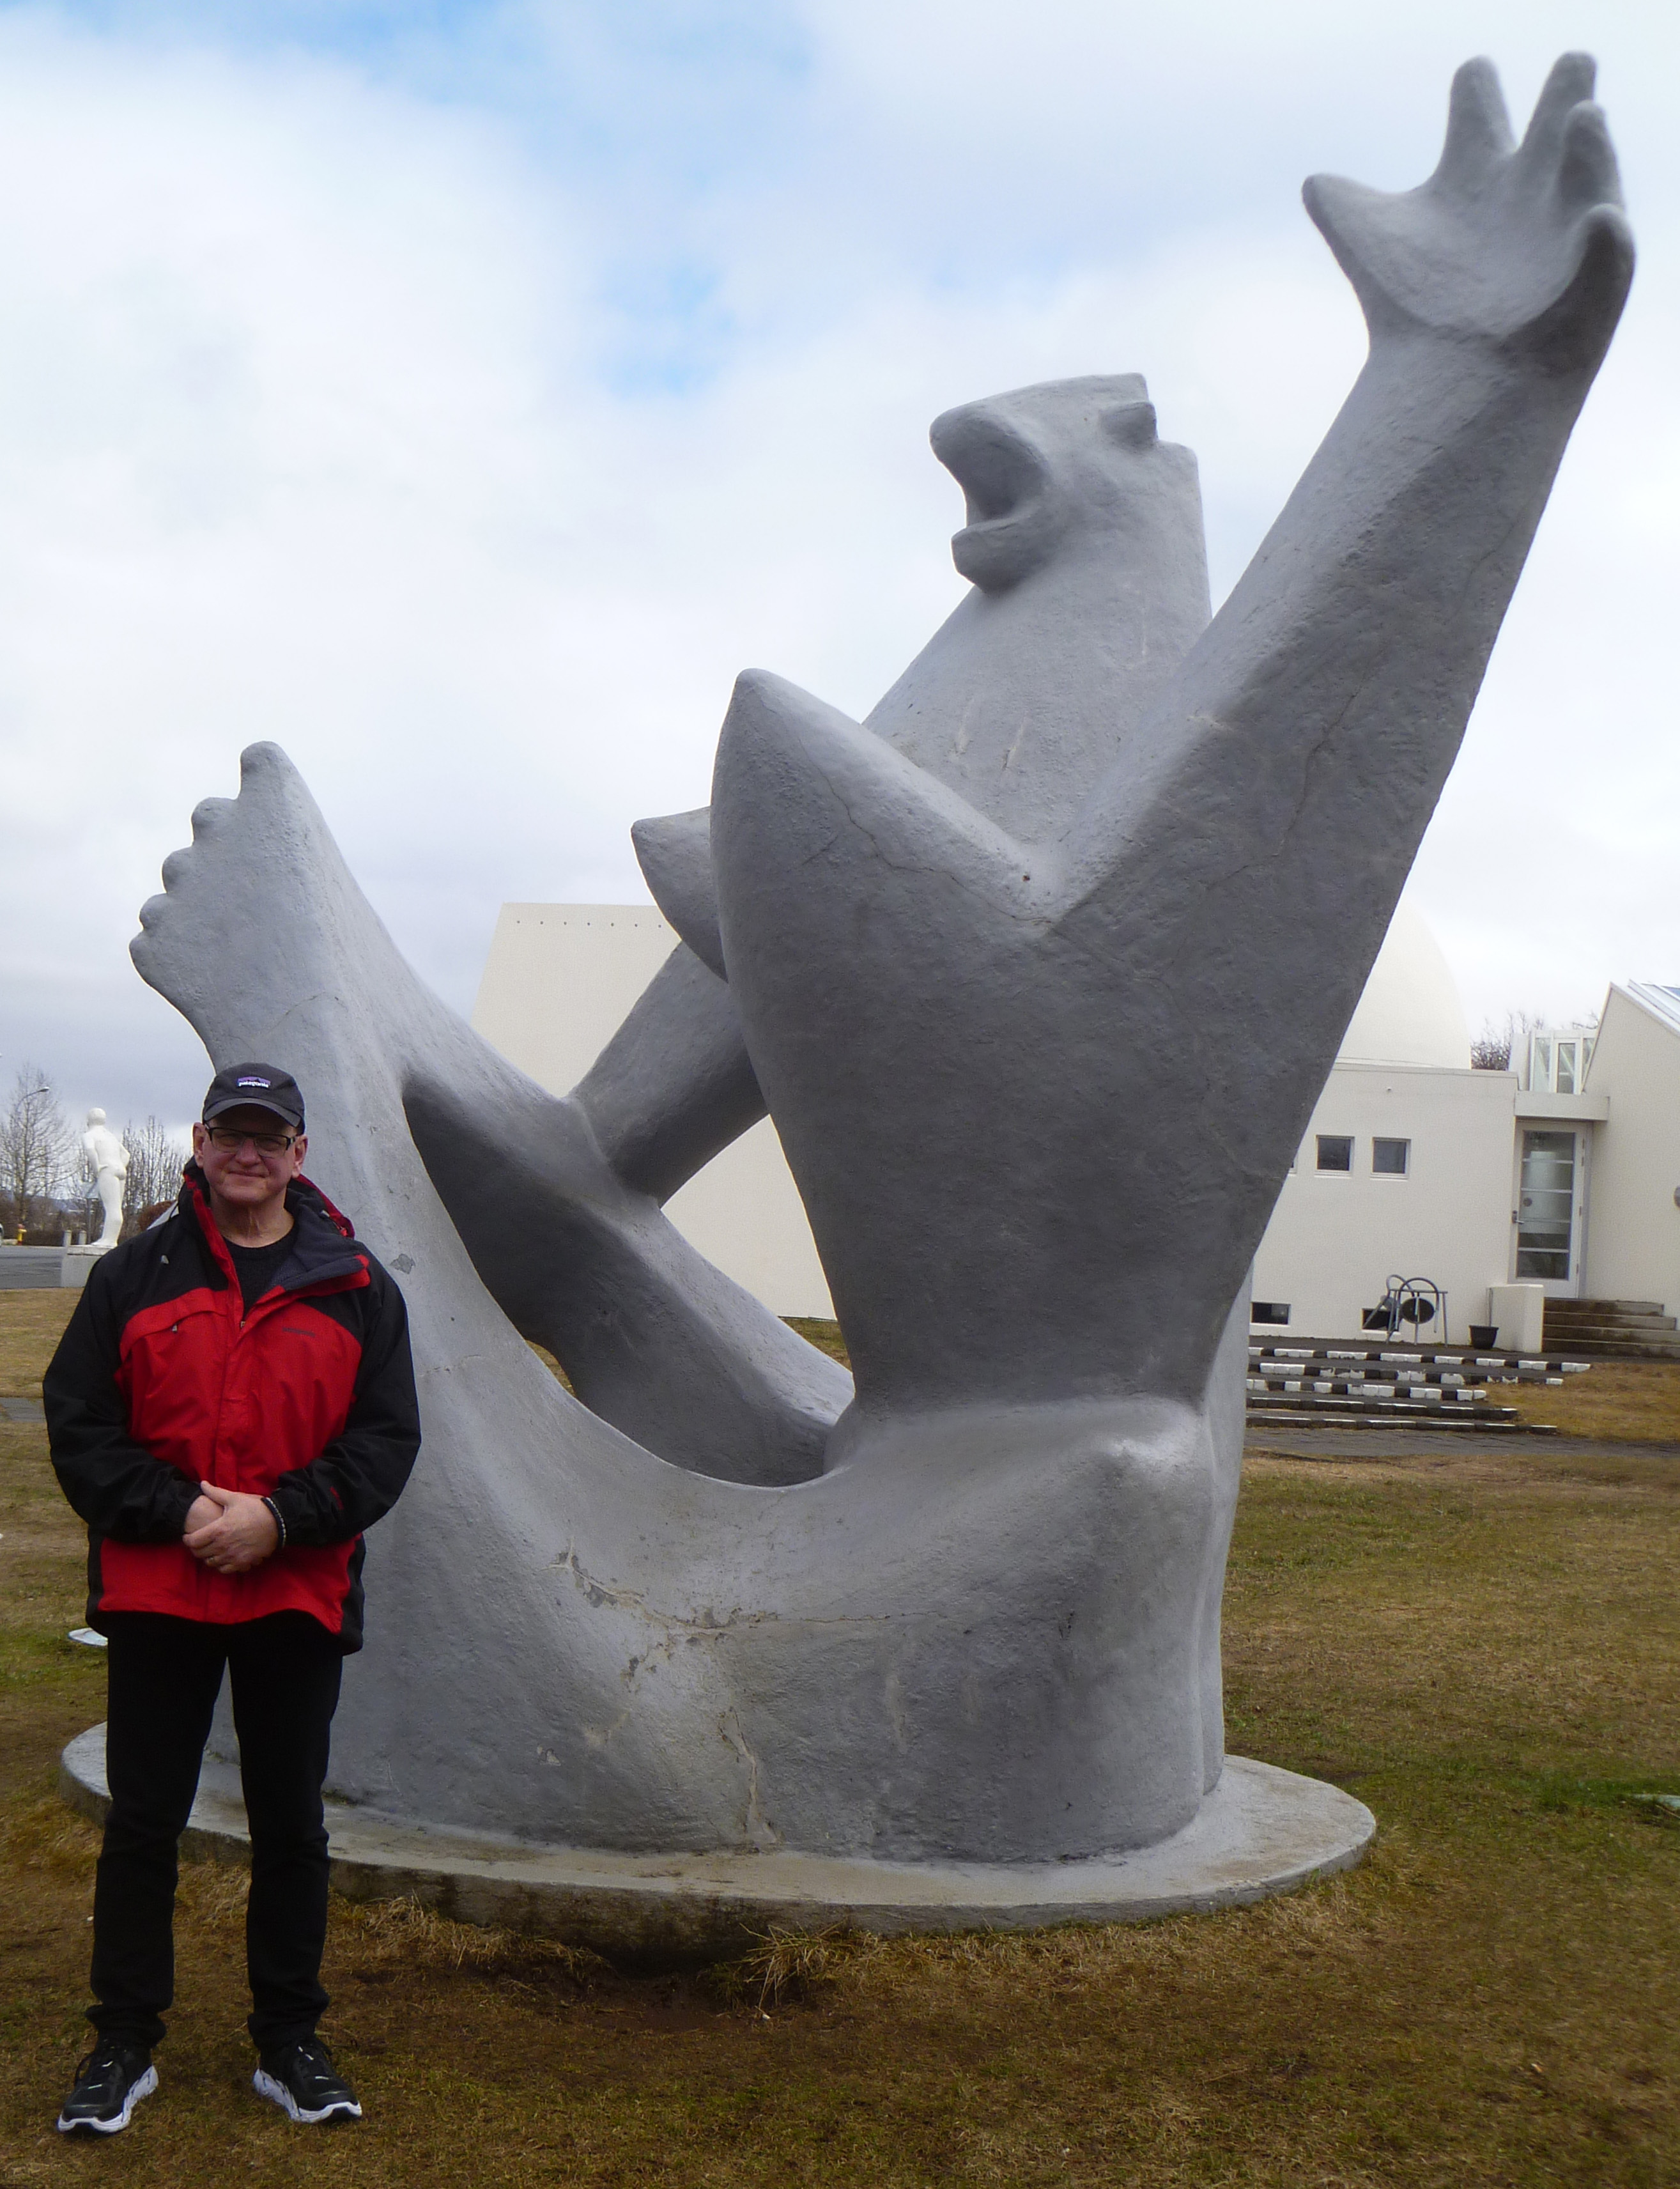 Michael with Sveinsson's large work "Trollwoman" 1948